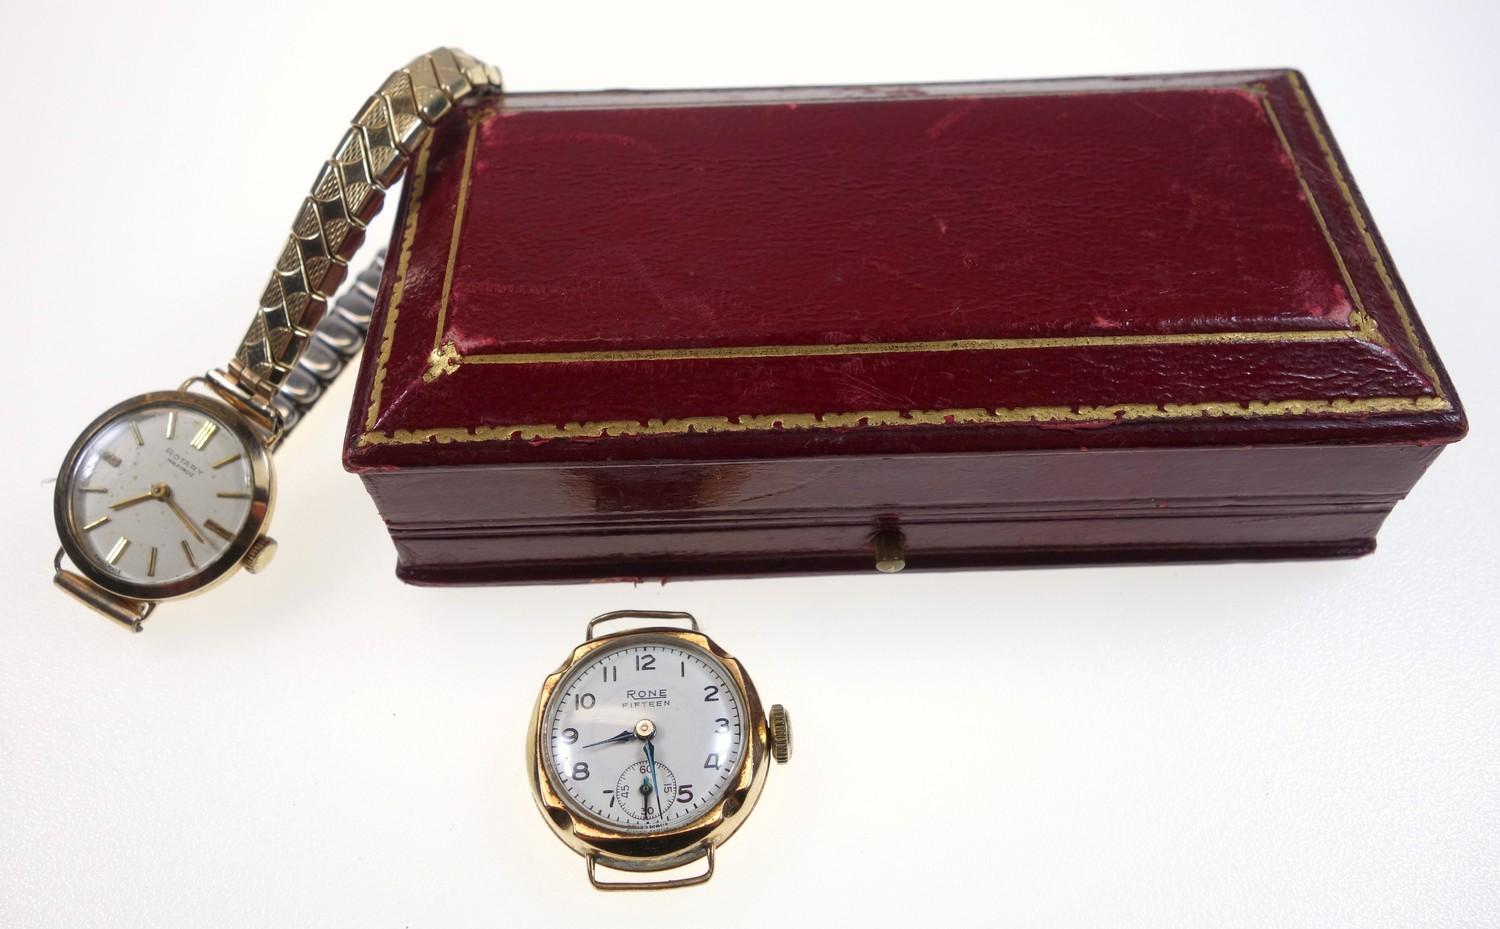 Edwardian ladies gold watch, the case with raised floral decoration and engraved sides, 14 ct, on - Image 4 of 4